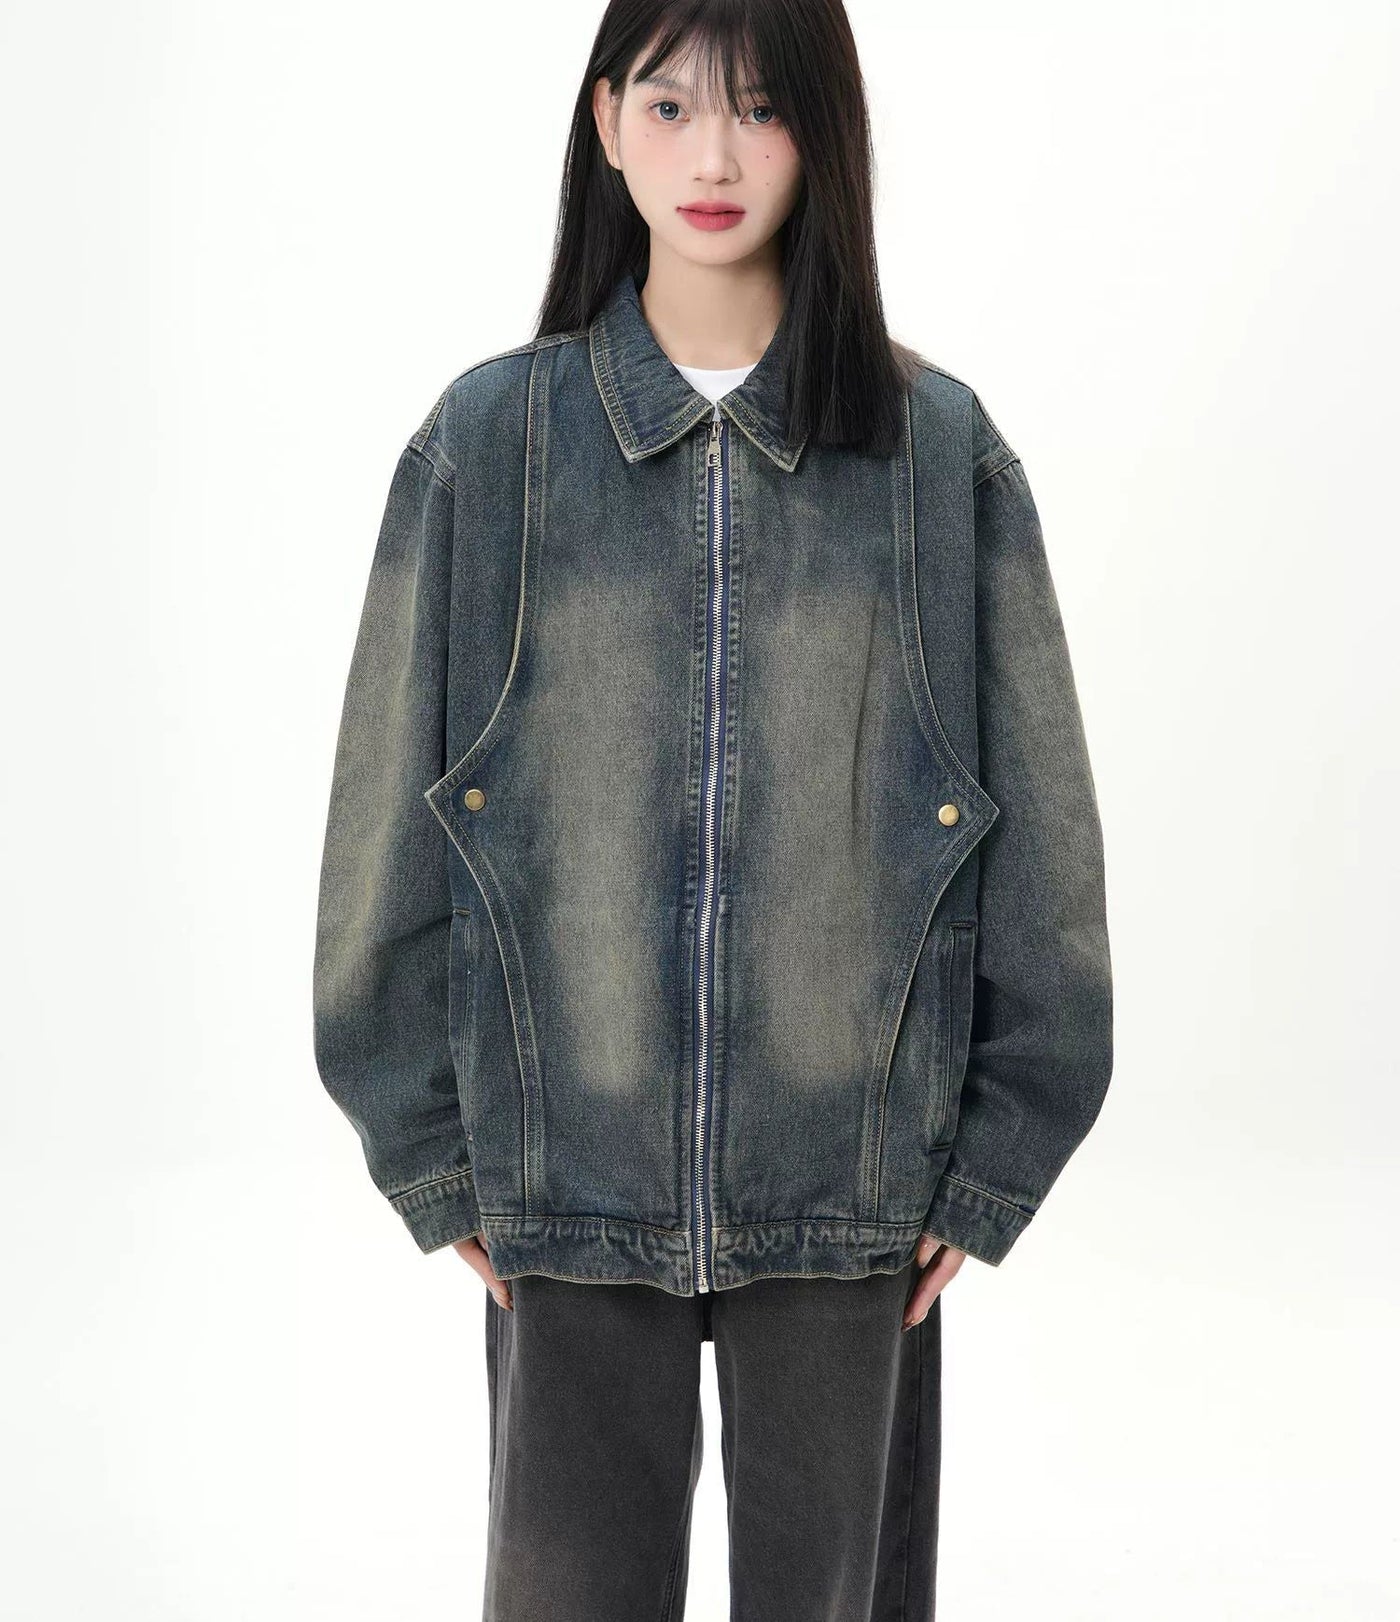 Buttoned and Zippered Denim Jacket Korean Street Fashion Jacket By Jump Next Shop Online at OH Vault